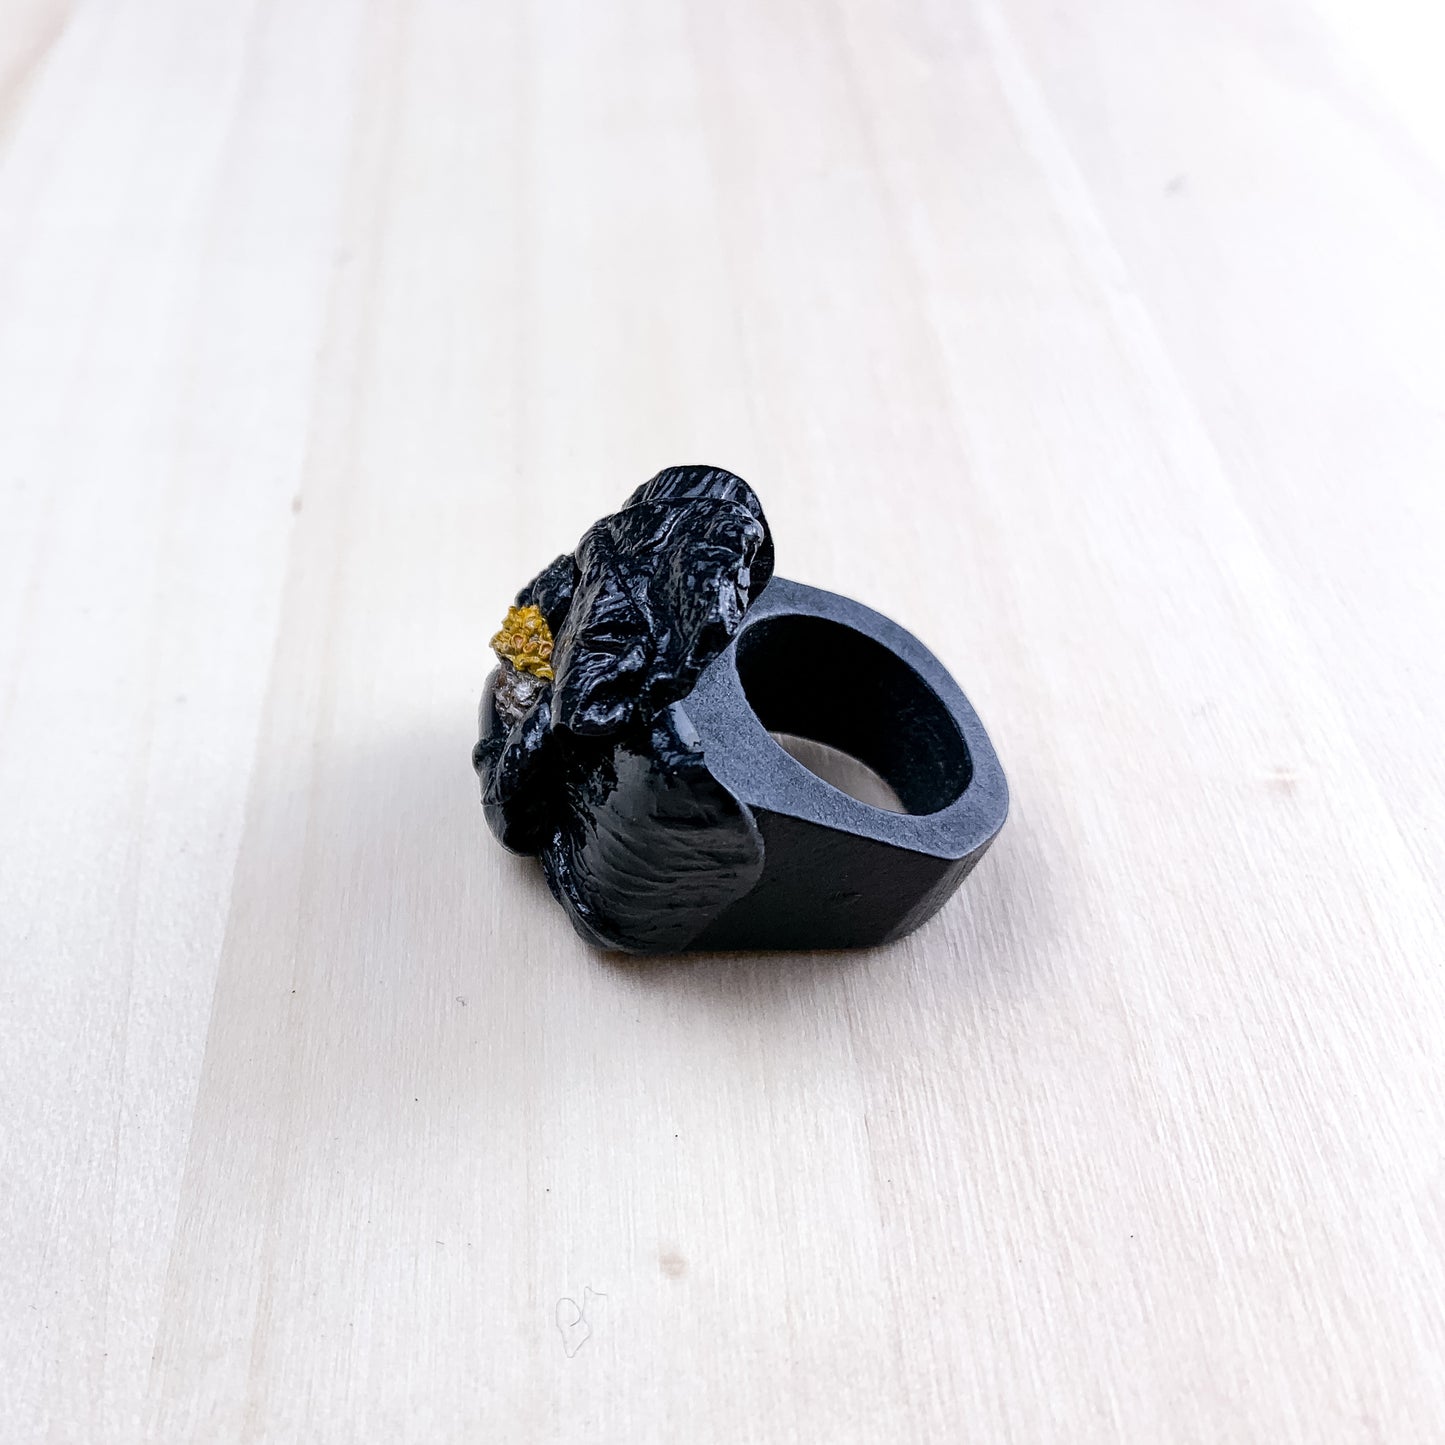 Petals and bark scented ring